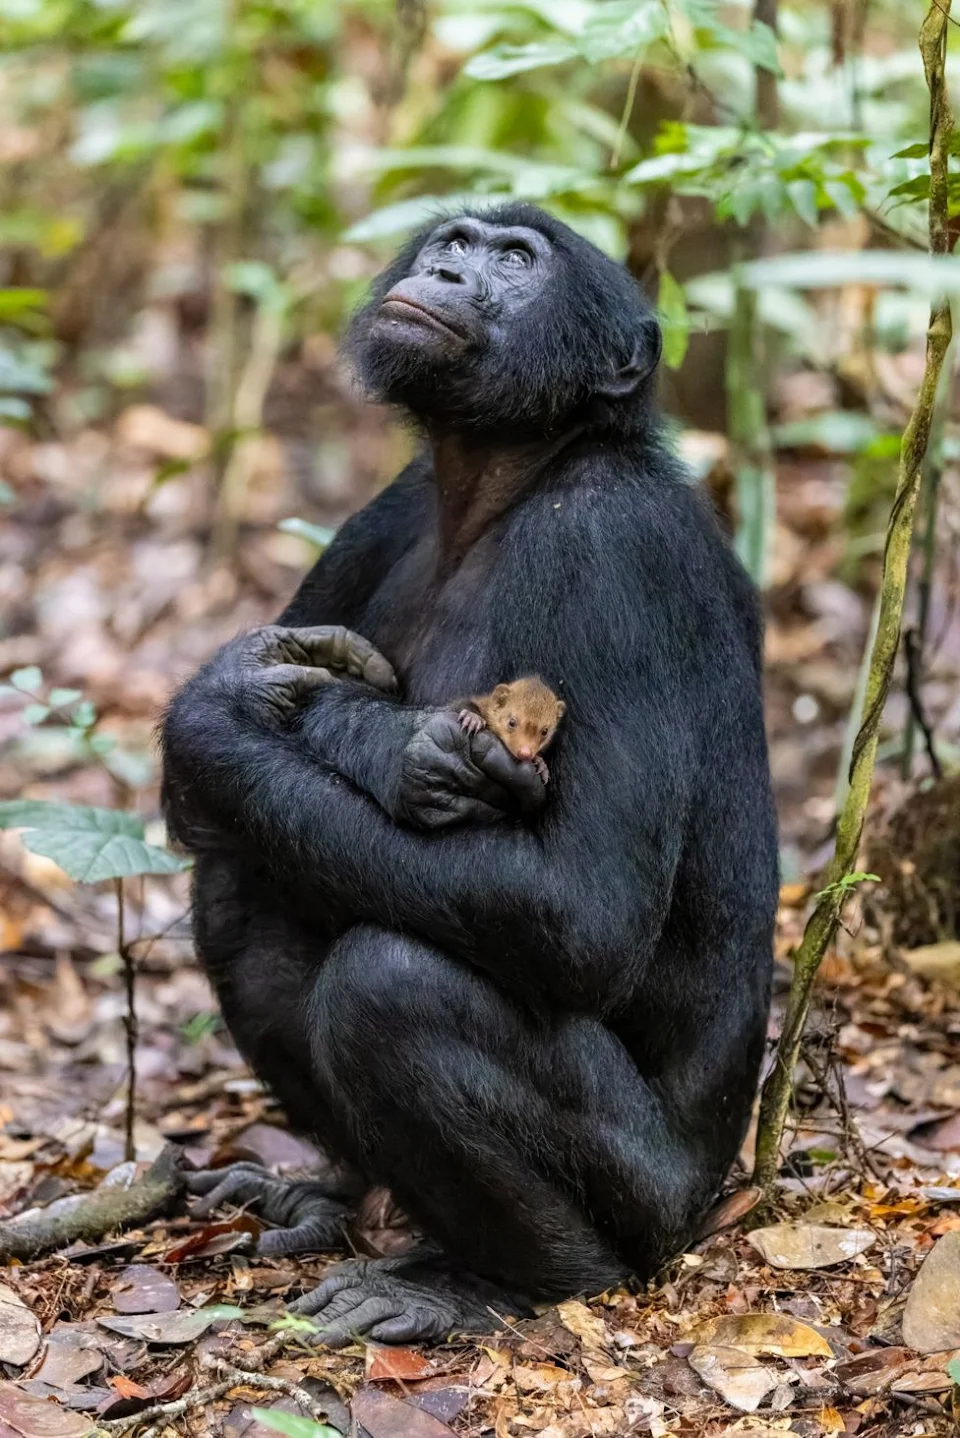 The bonobo and the mongoose